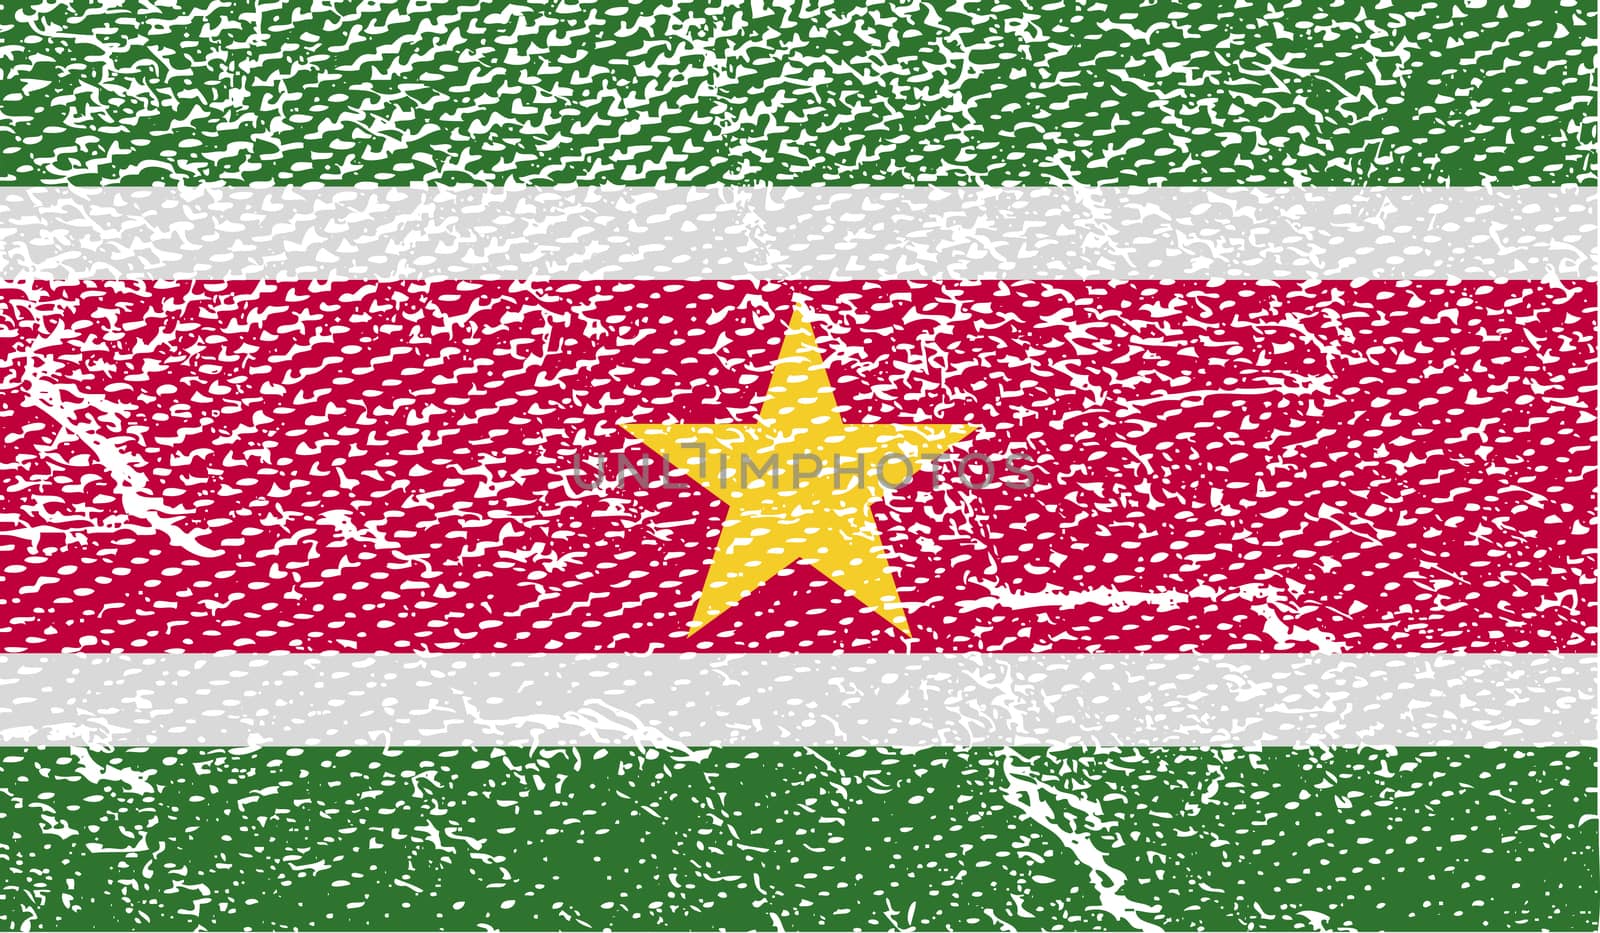 Flag of Suriname with old texture.  illustration